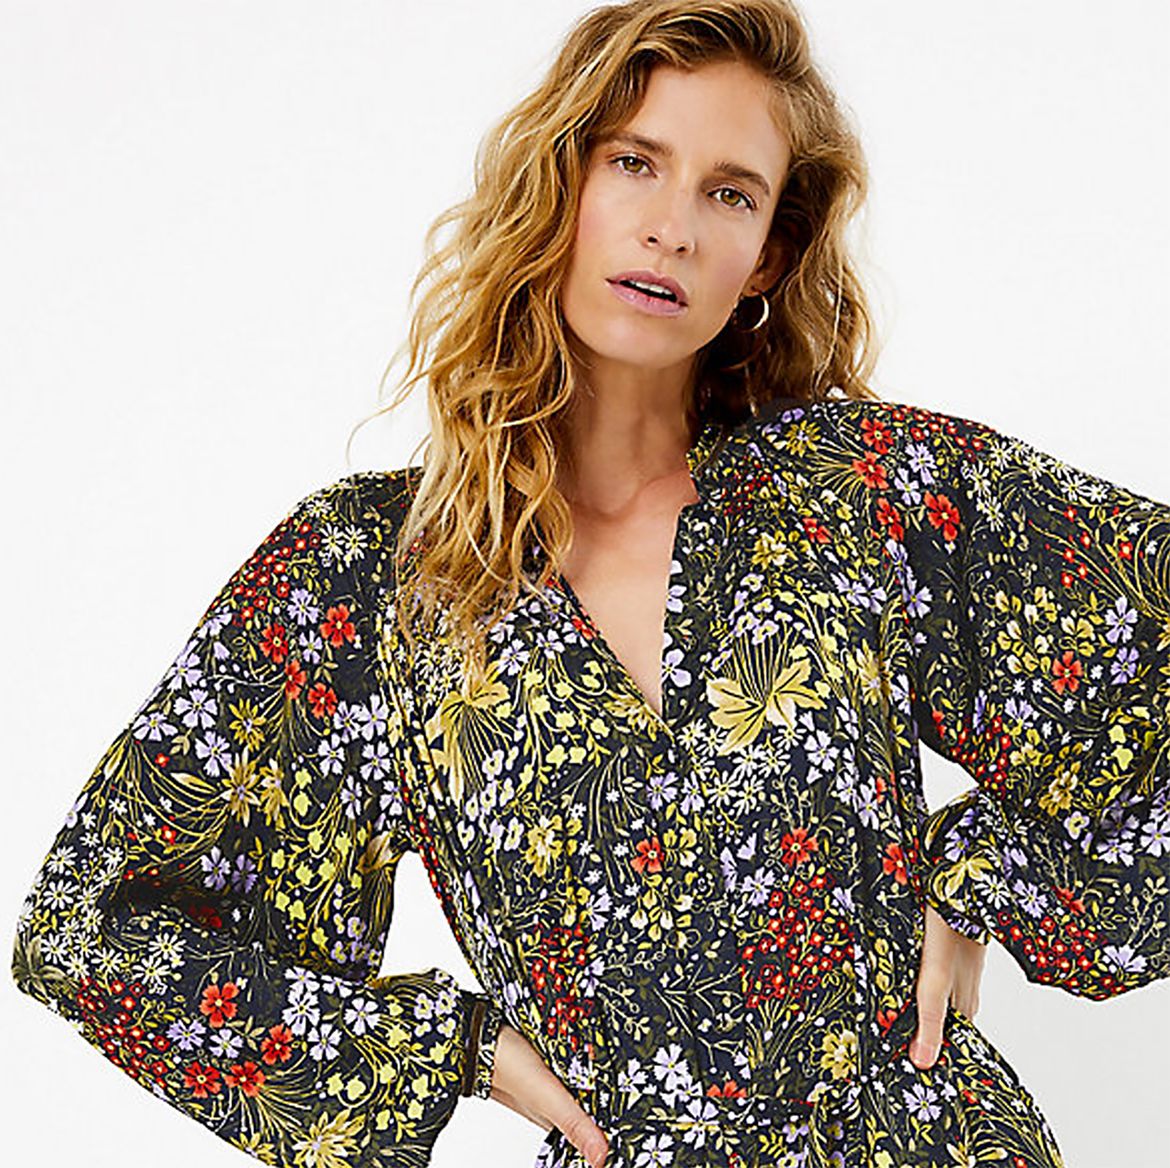 Marks & Spencer's floral midi dress is the hero buy of the season